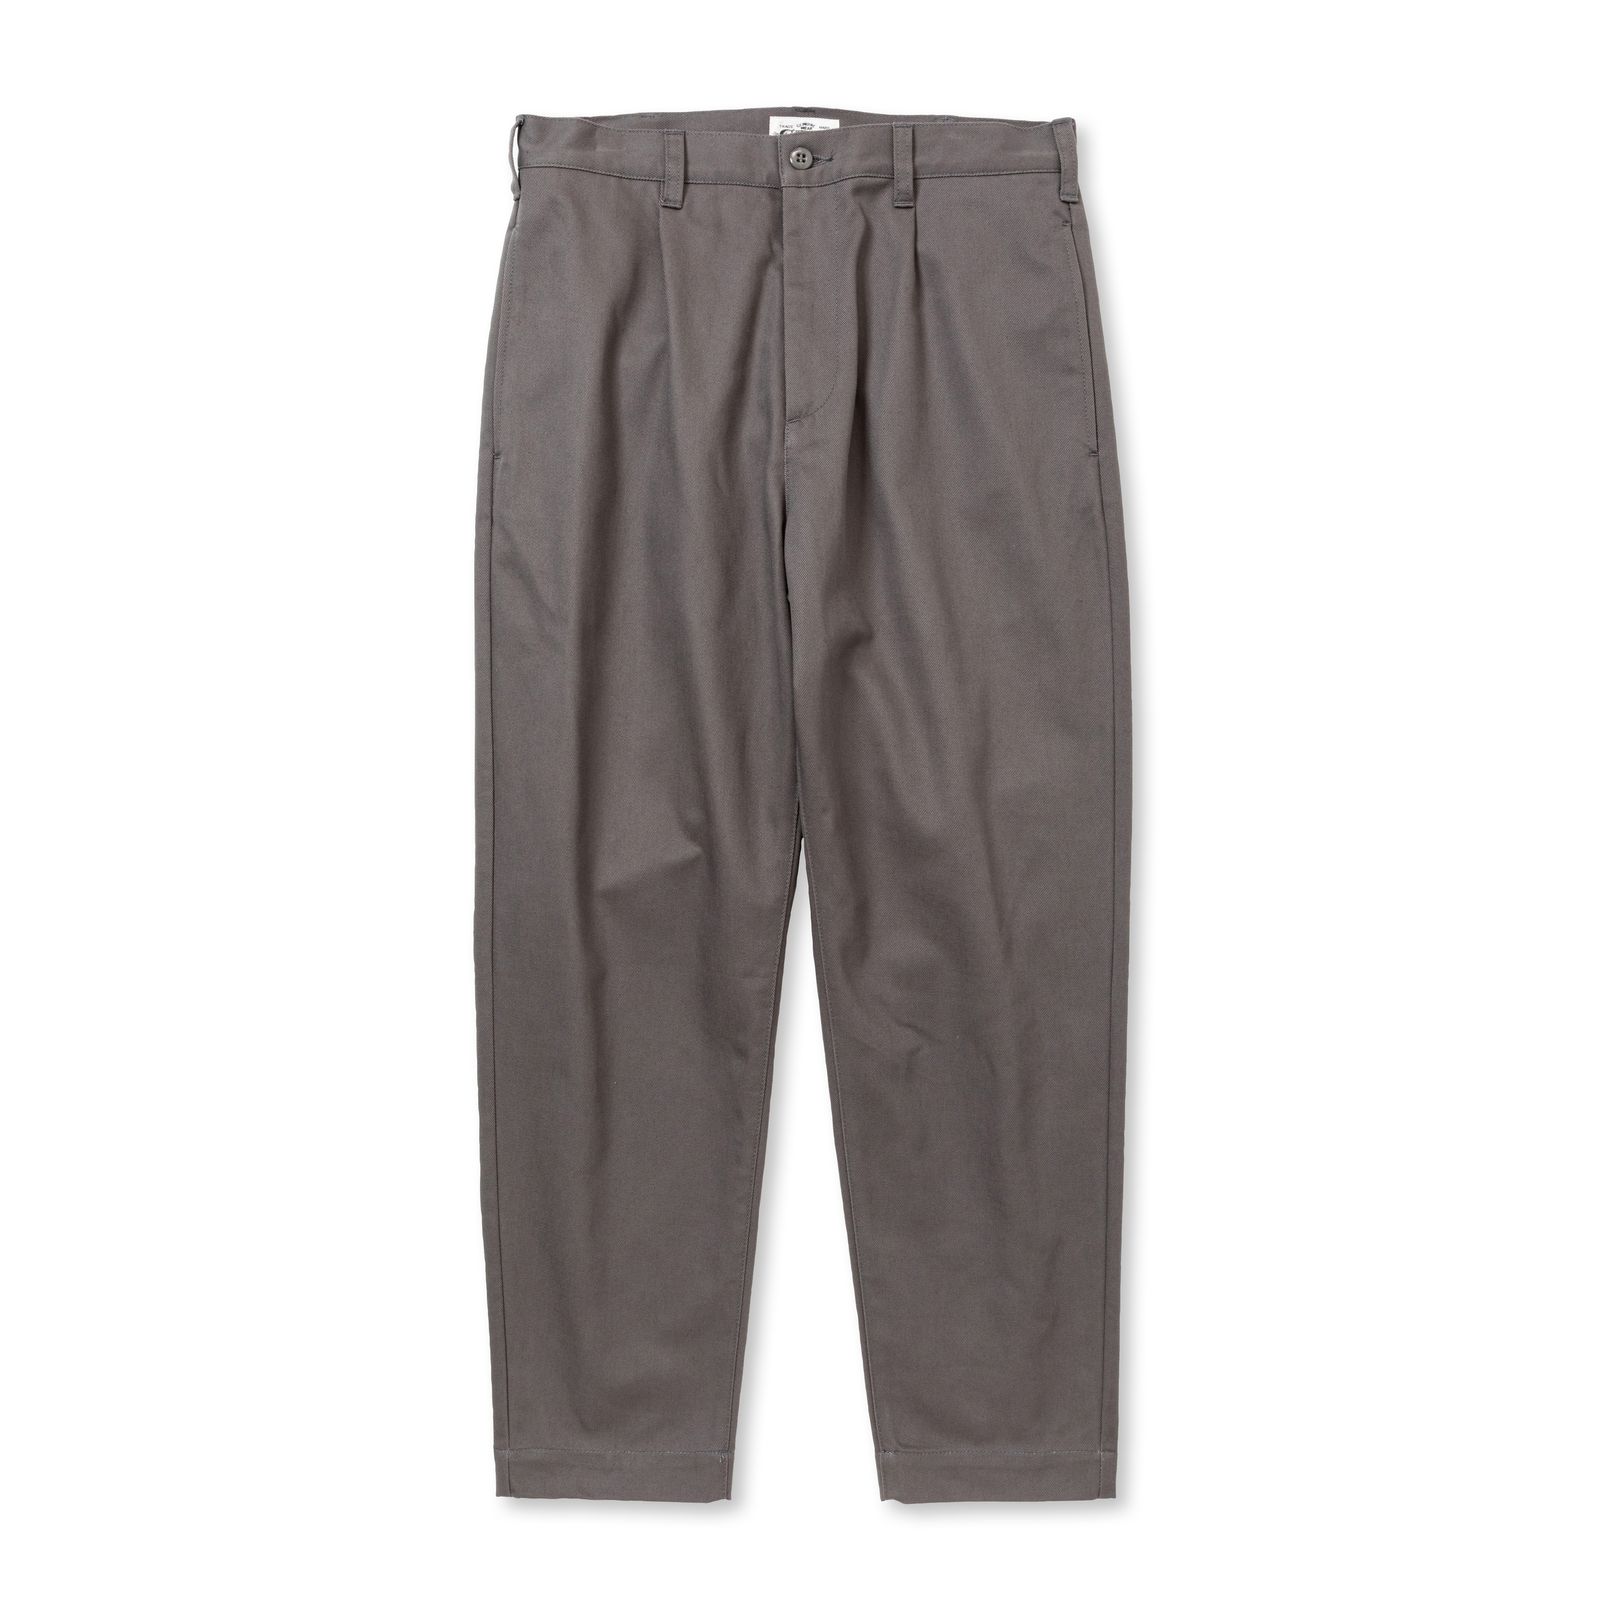 CALEE - 【ラスト1点】VINTAGE TYPE CHINO CLOTH TUCK TROUSERS (GRAY 